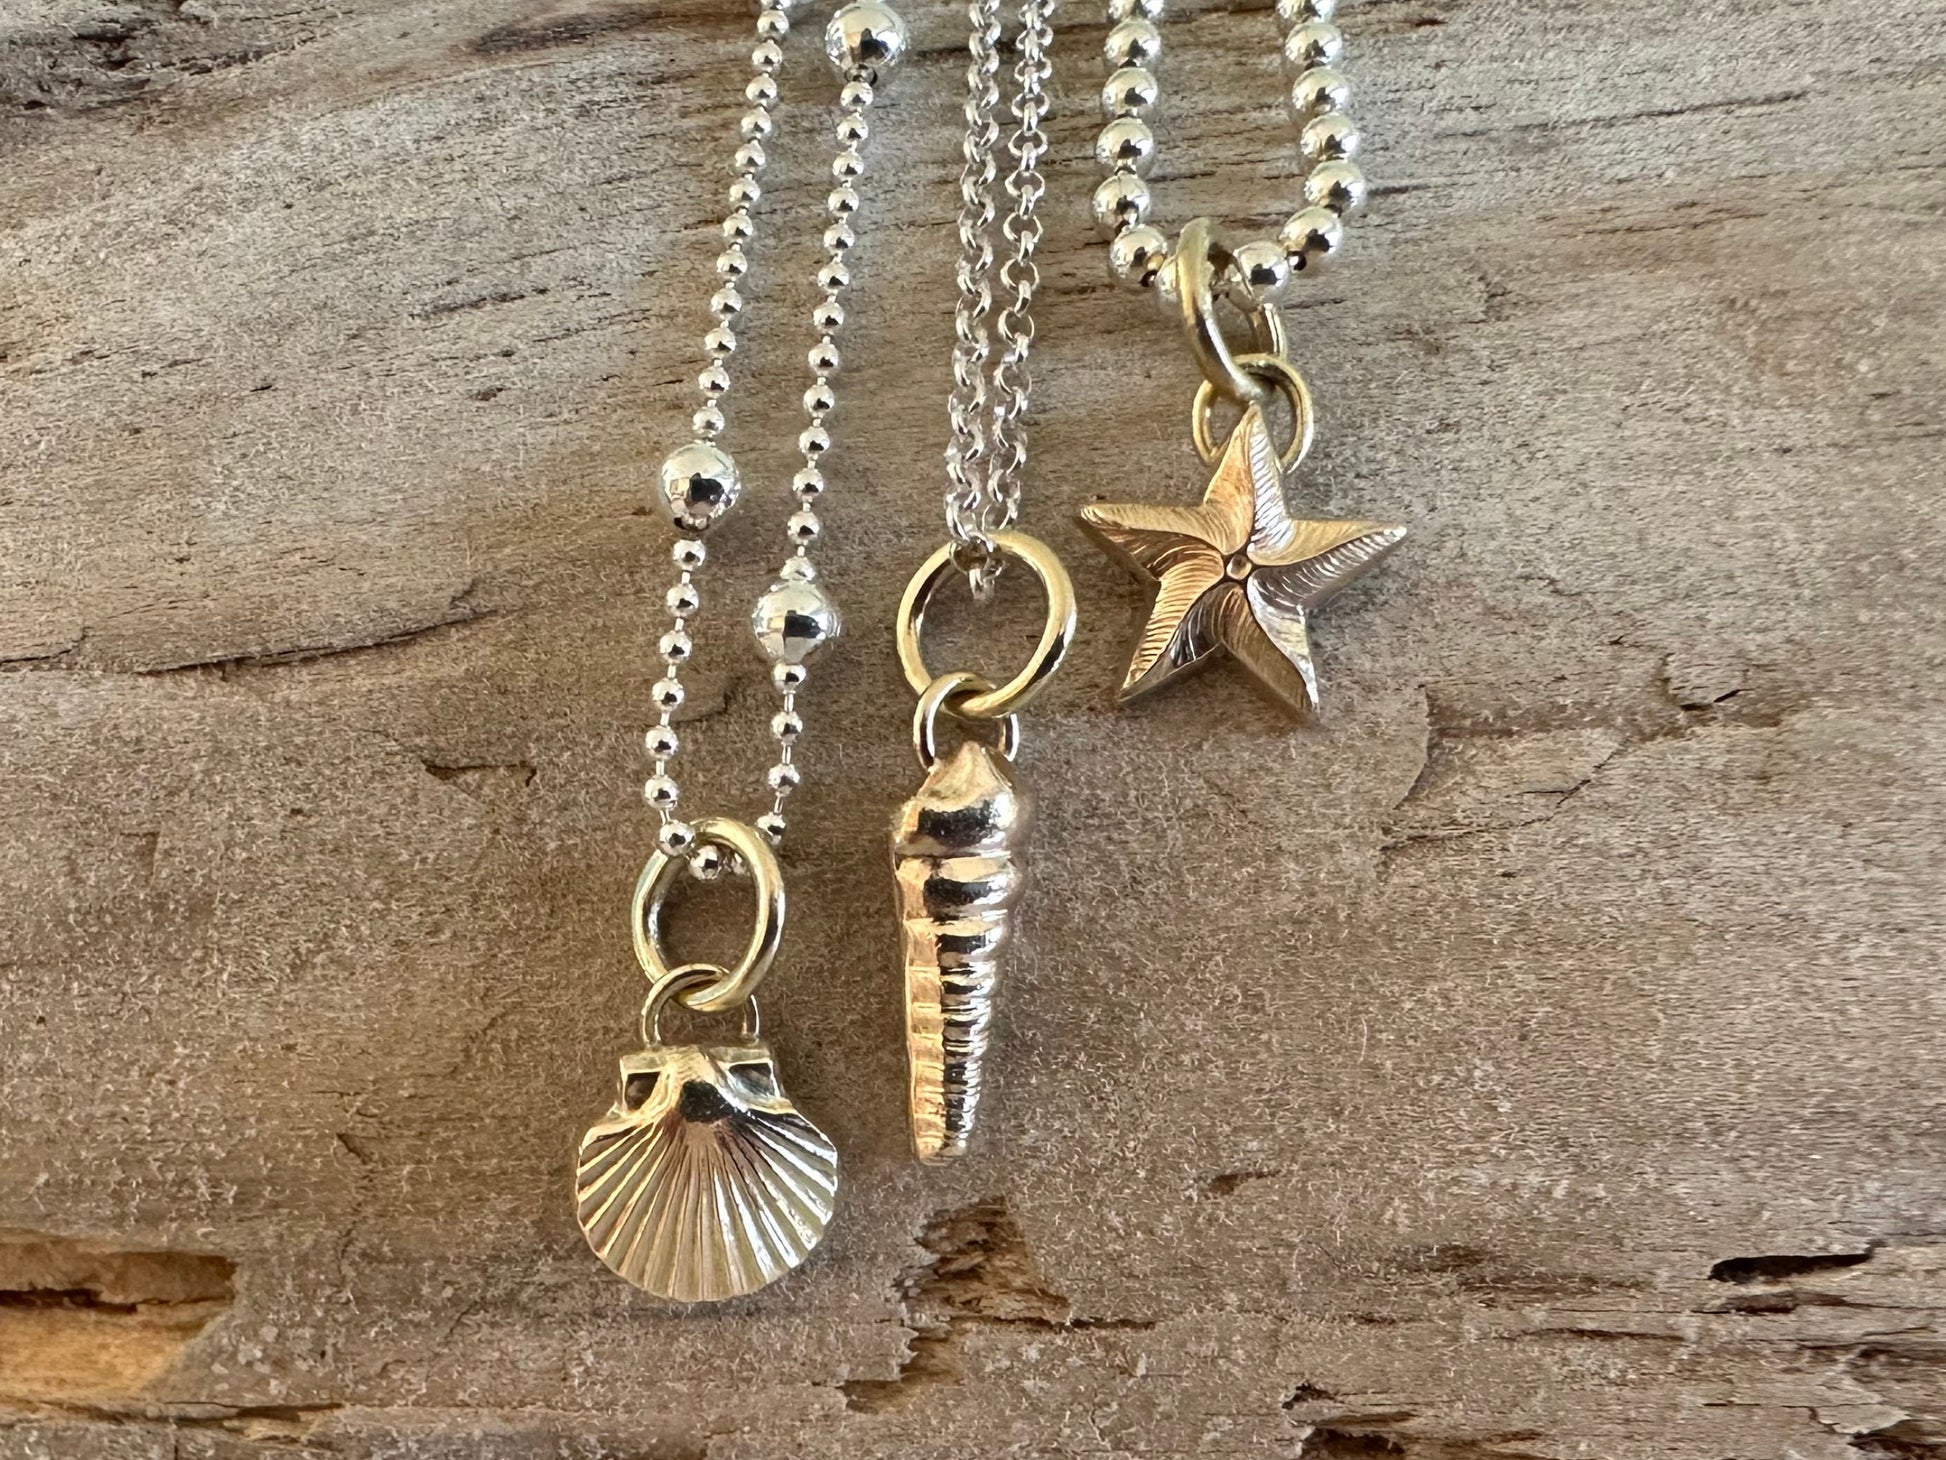 Hallmarked solid 9ct gold Scallop Seashell pendant charm necklace, handmade from recycled 9ct gold, Ready to ship